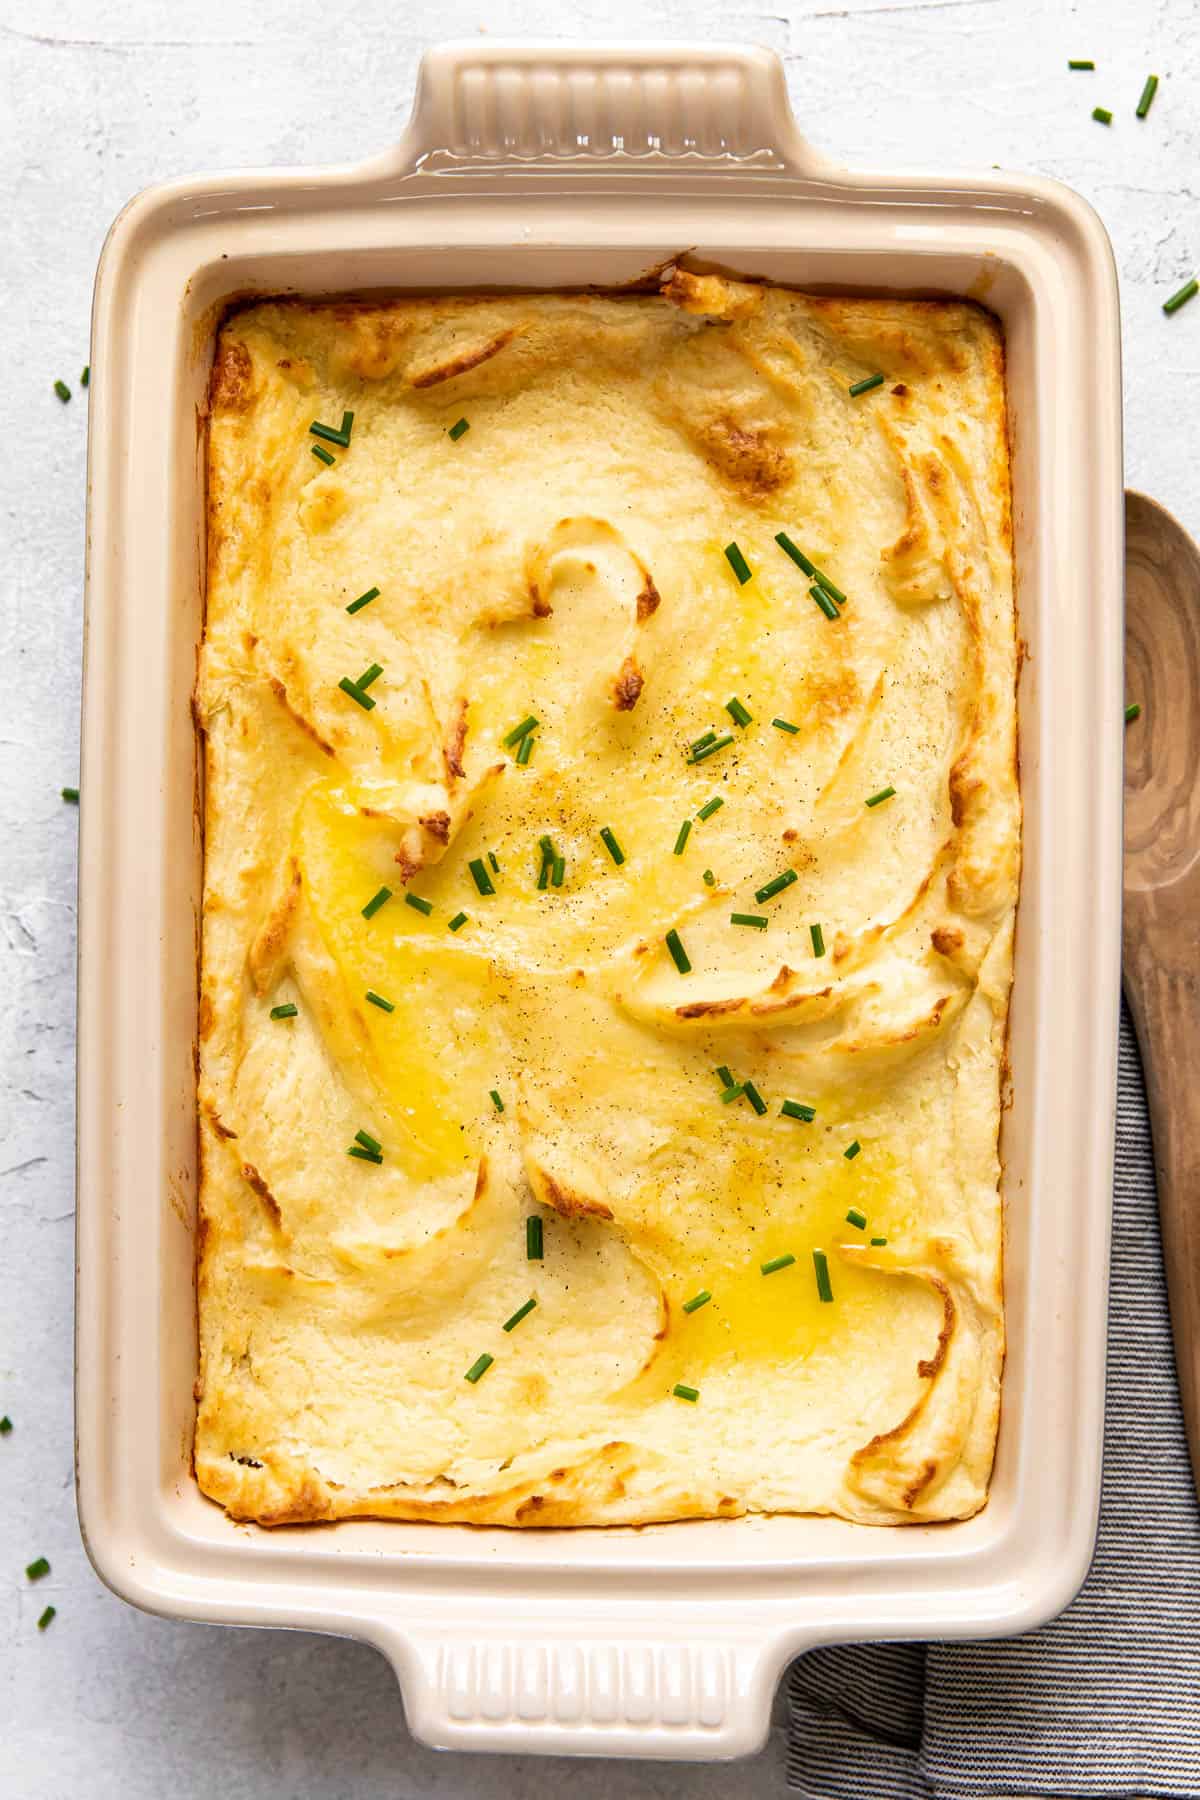 baked mashed potatoes in a baking dish.